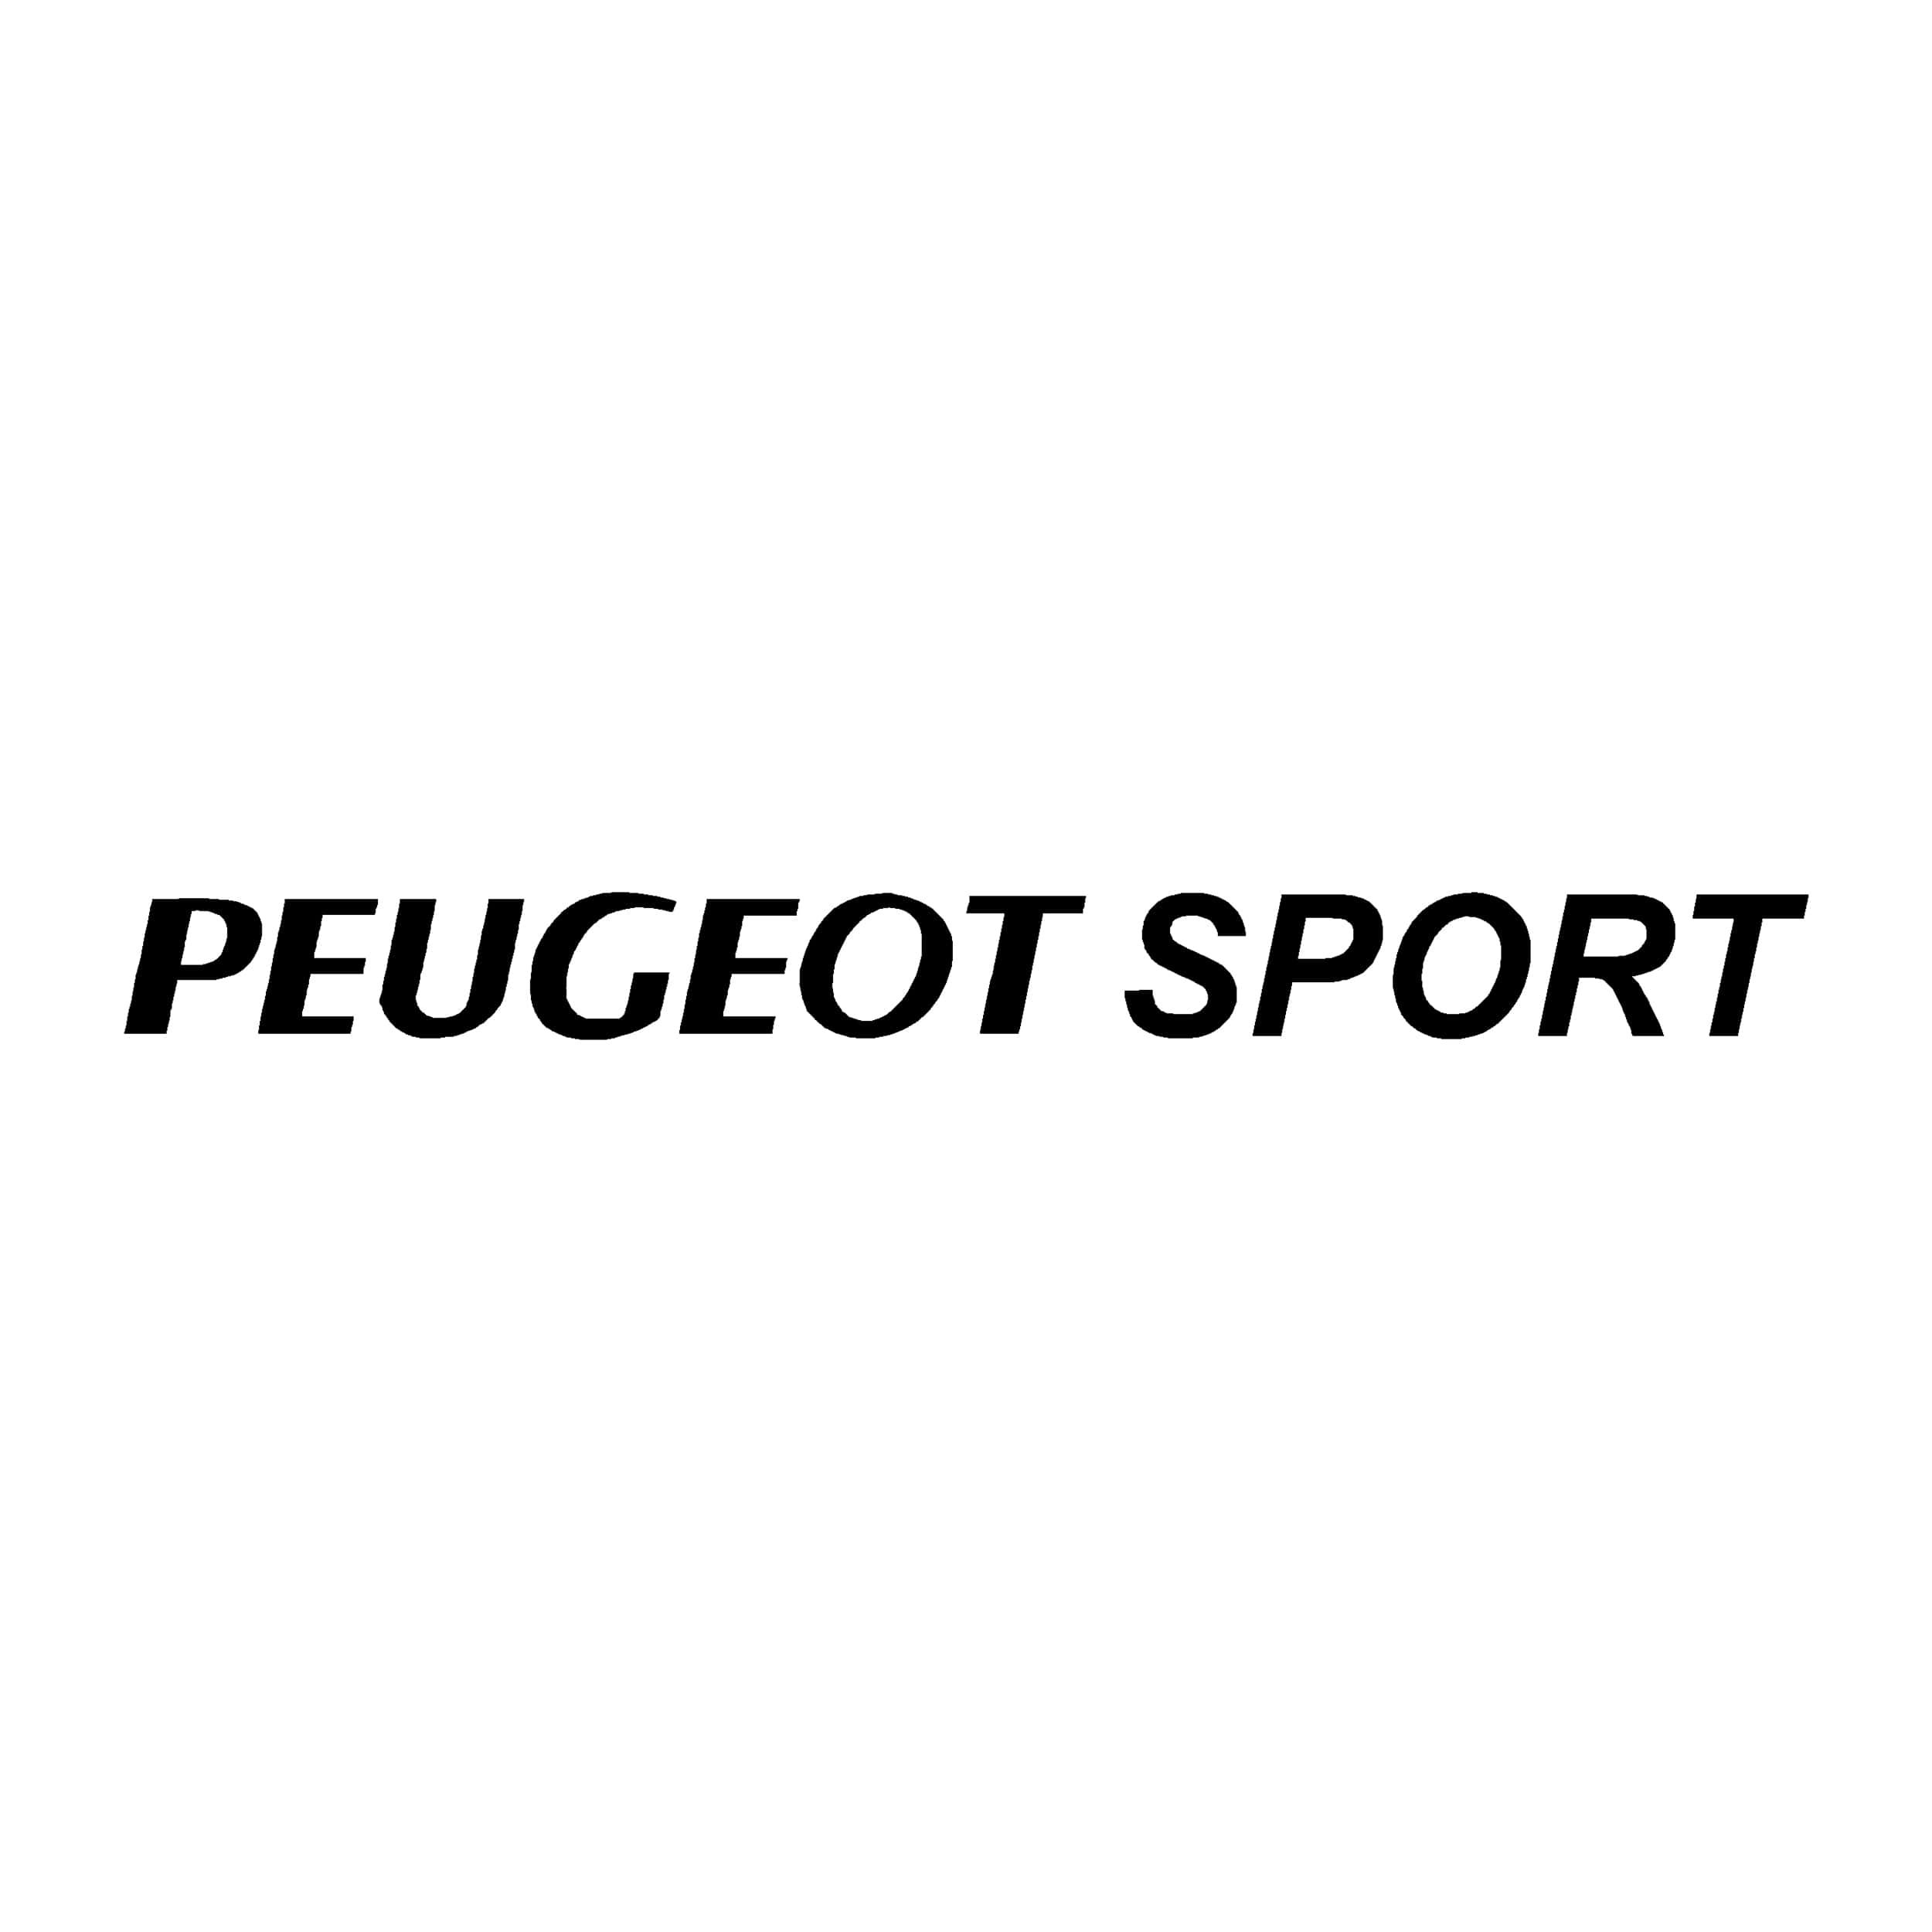 stickers-peugeot-sport-ref-5-autocolant-adhesif-racing-auto-tuning-ralllye-competition-sticker-deco-adhesive-voiture-min